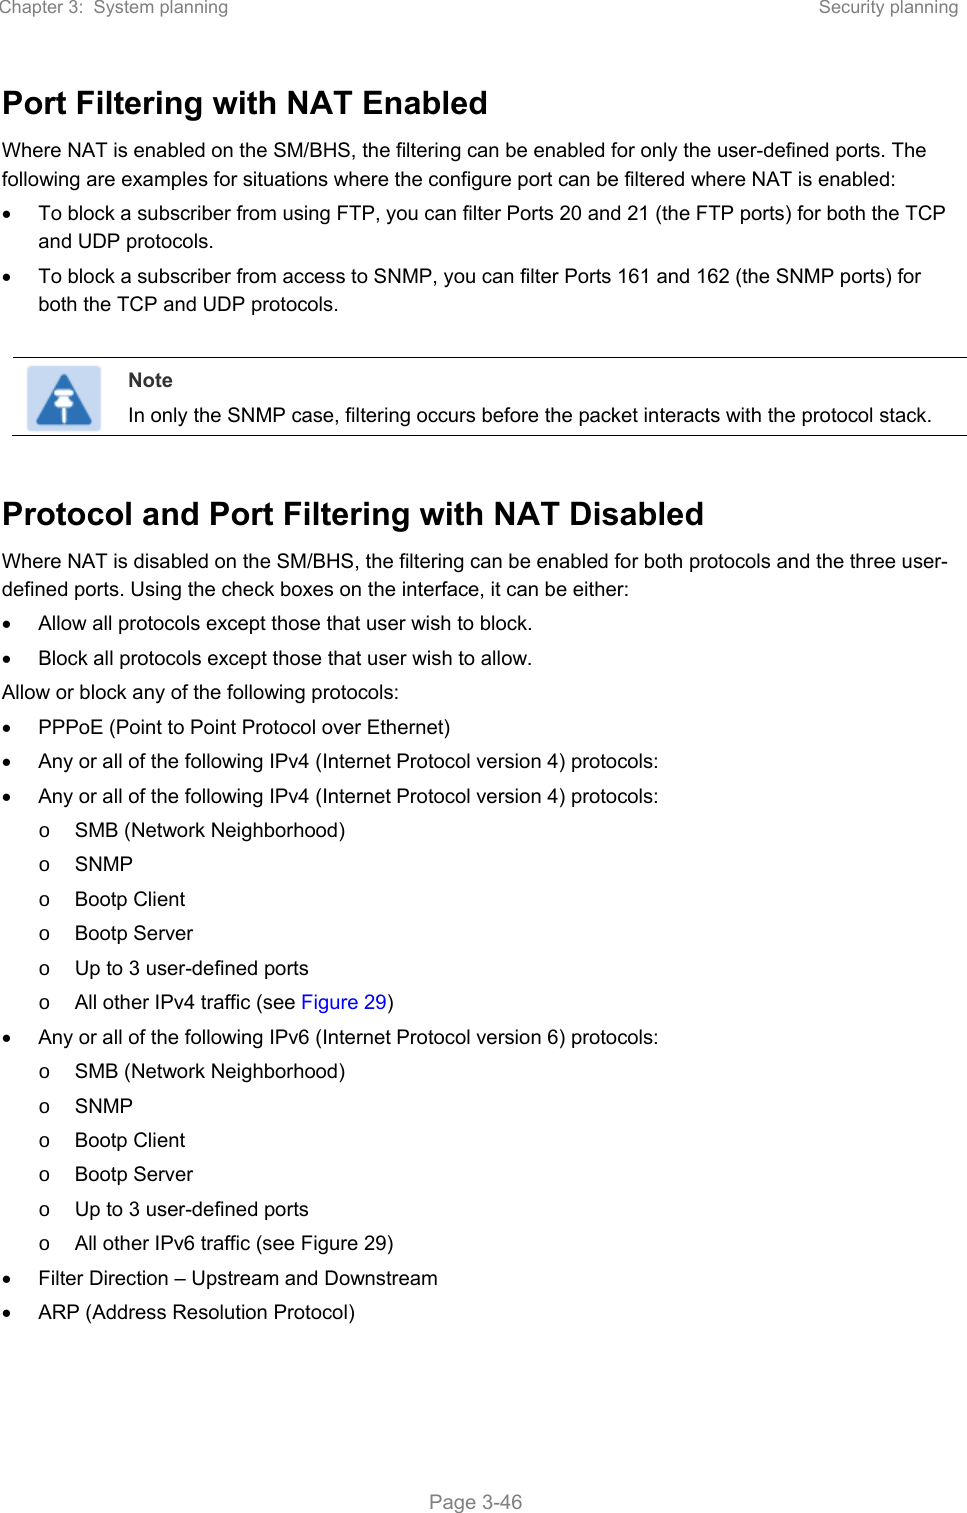 Chapter 3:  System planning  Security planning   Page 3-46 Port Filtering with NAT Enabled  Where NAT is enabled on the SM/BHS, the filtering can be enabled for only the user-defined ports. The following are examples for situations where the configure port can be filtered where NAT is enabled:    To block a subscriber from using FTP, you can filter Ports 20 and 21 (the FTP ports) for both the TCP and UDP protocols.    To block a subscriber from access to SNMP, you can filter Ports 161 and 162 (the SNMP ports) for both the TCP and UDP protocols.    Note In only the SNMP case, filtering occurs before the packet interacts with the protocol stack.  Protocol and Port Filtering with NAT Disabled  Where NAT is disabled on the SM/BHS, the filtering can be enabled for both protocols and the three user-defined ports. Using the check boxes on the interface, it can be either:    Allow all protocols except those that user wish to block.    Block all protocols except those that user wish to allow.  Allow or block any of the following protocols:    PPPoE (Point to Point Protocol over Ethernet)    Any or all of the following IPv4 (Internet Protocol version 4) protocols:    Any or all of the following IPv4 (Internet Protocol version 4) protocols:  o  SMB (Network Neighborhood)  o  SNMP  o  Bootp Client  o  Bootp Server  o  Up to 3 user-defined ports  o  All other IPv4 traffic (see Figure 29)    Any or all of the following IPv6 (Internet Protocol version 6) protocols:  o  SMB (Network Neighborhood)  o  SNMP  o  Bootp Client  o  Bootp Server o  Up to 3 user-defined ports o  All other IPv6 traffic (see Figure 29)   Filter Direction – Upstream and Downstream   ARP (Address Resolution Protocol) 